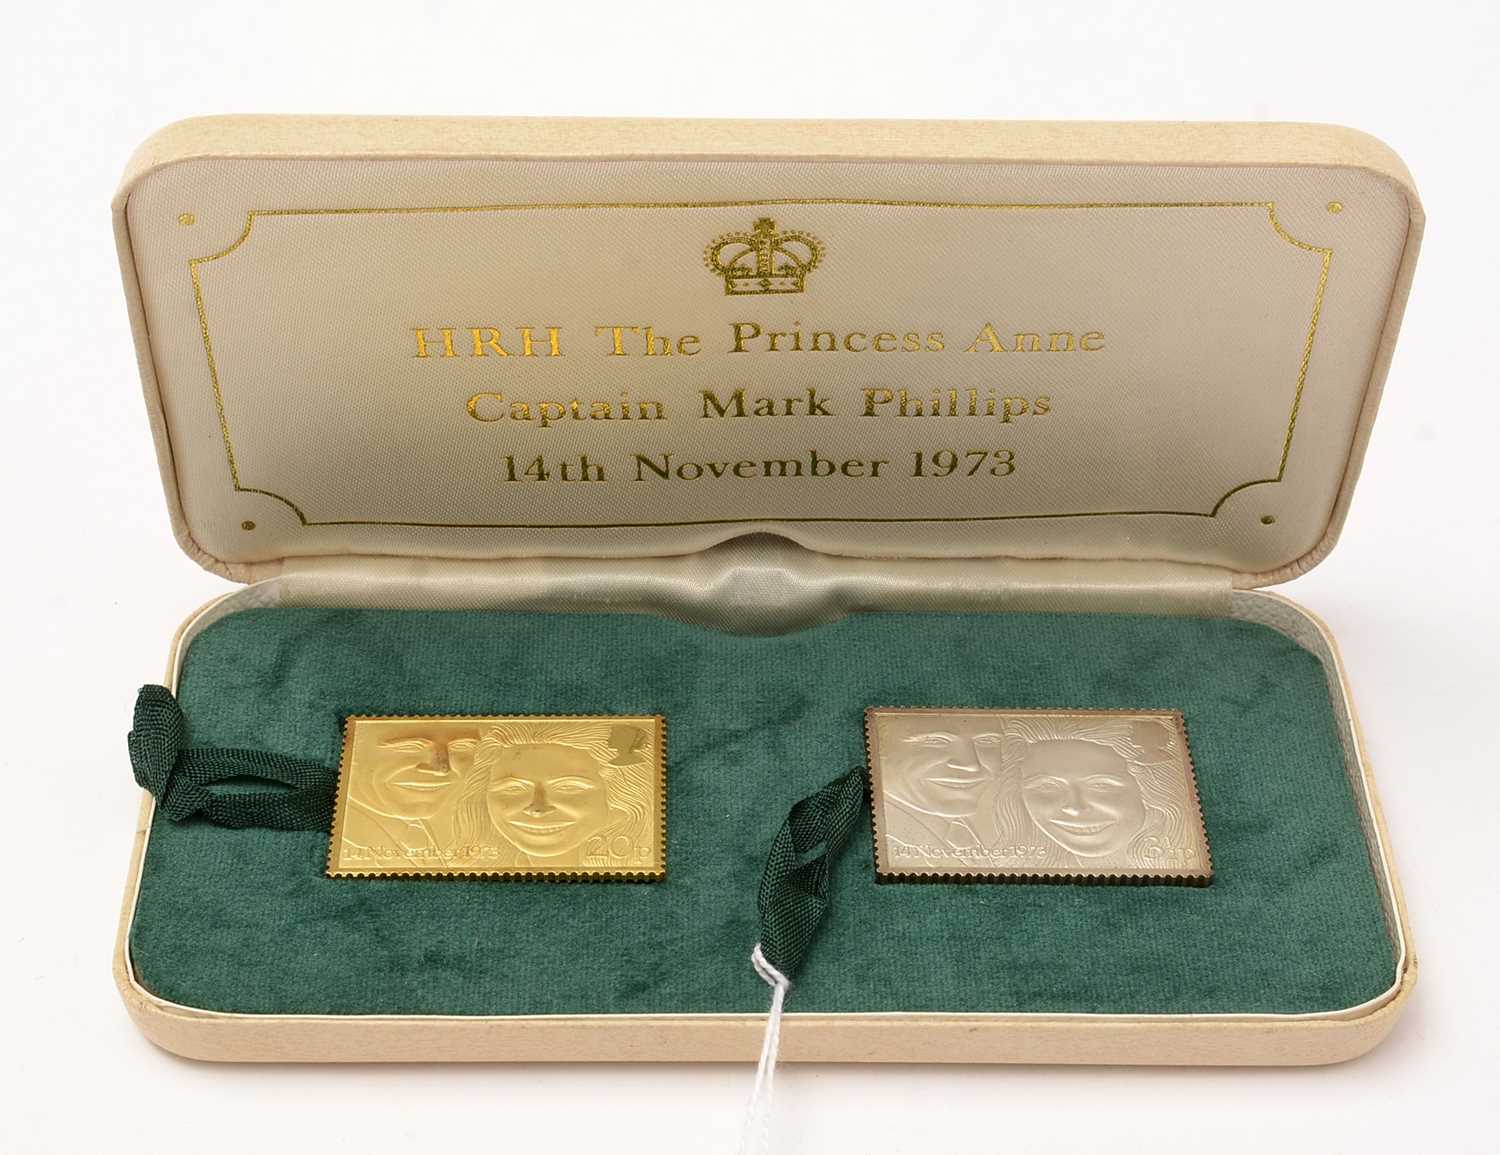 Lot 167 - "The Royal Wedding Stamp Replicas", 22ct gold and silver ingots.